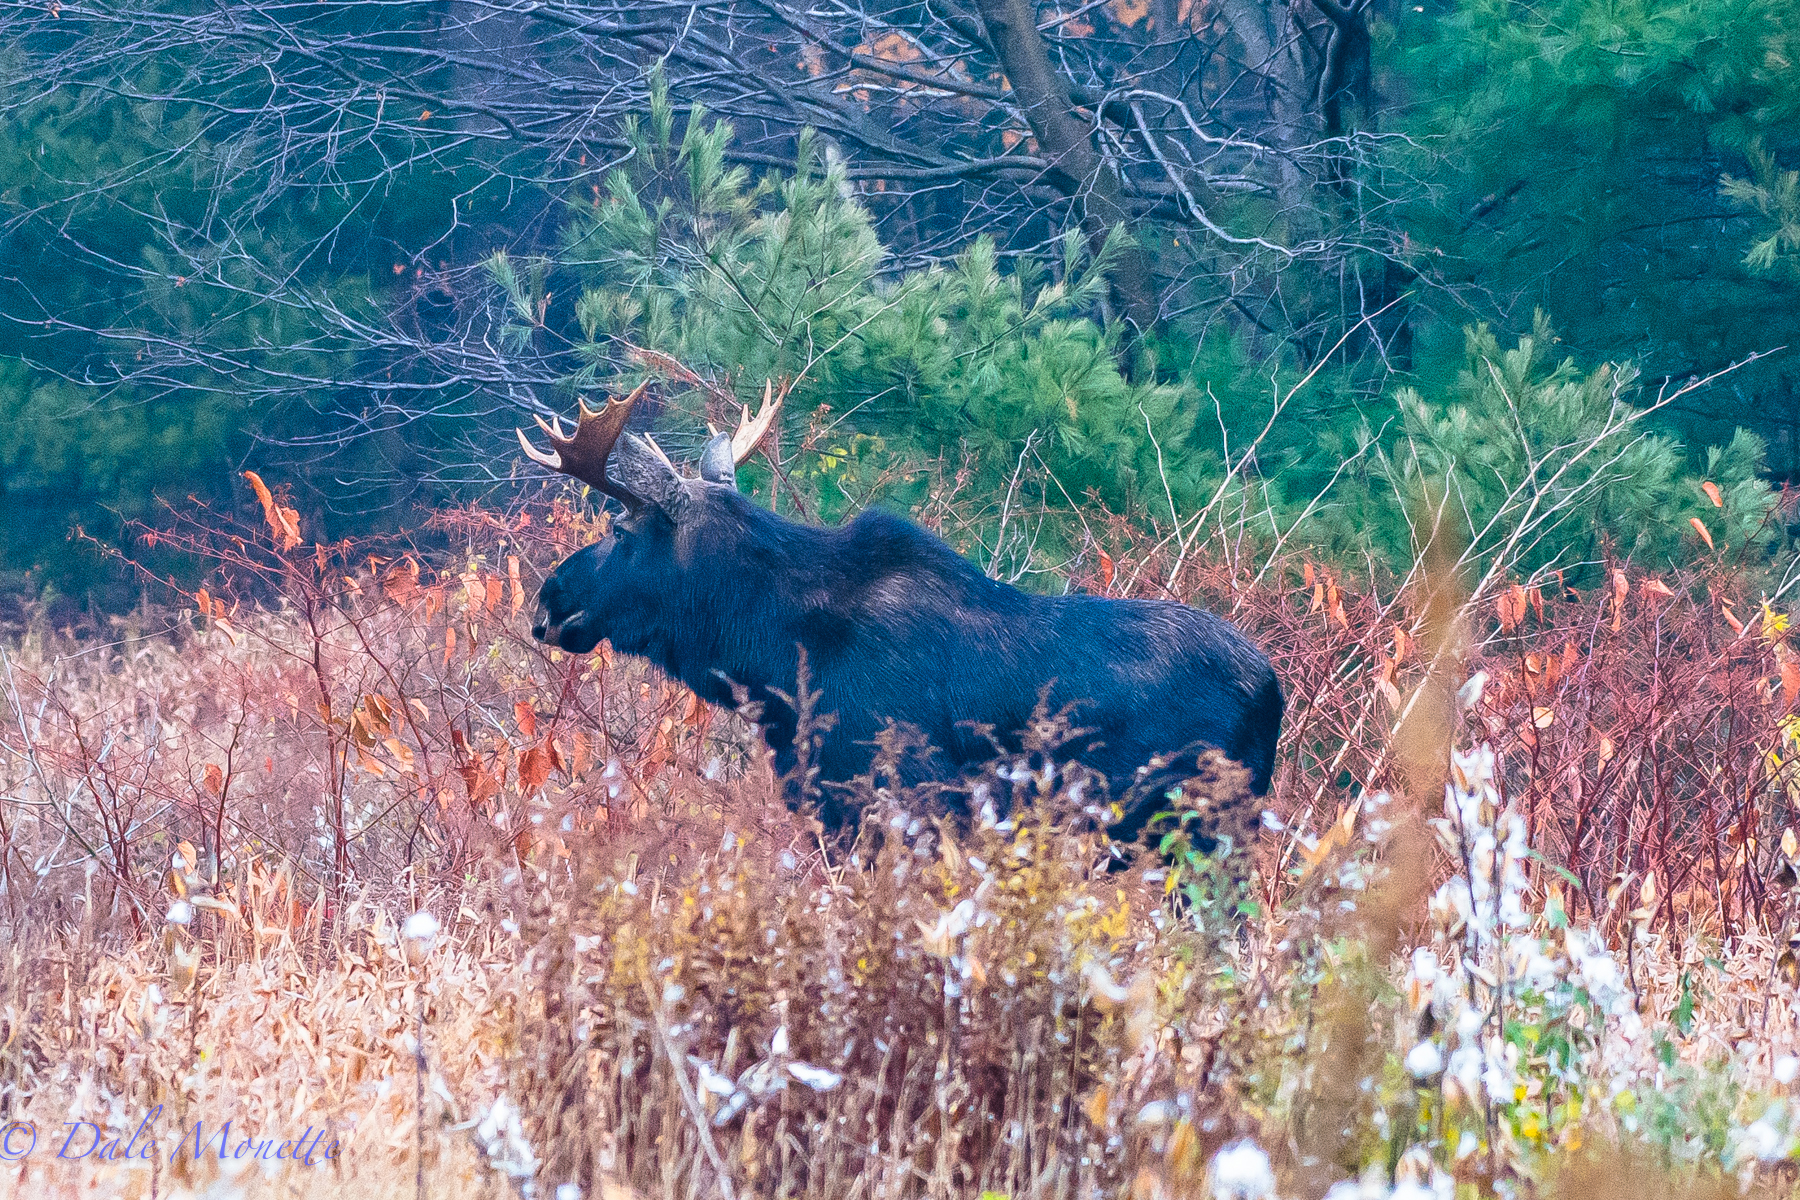   As I was set up alongside a field this morning,&nbsp;this bull moose came crashing out of the woods running right along. It ran about 100 yards, stopped, sniffed, looked around and ran off. I saw him again about an hour later.   